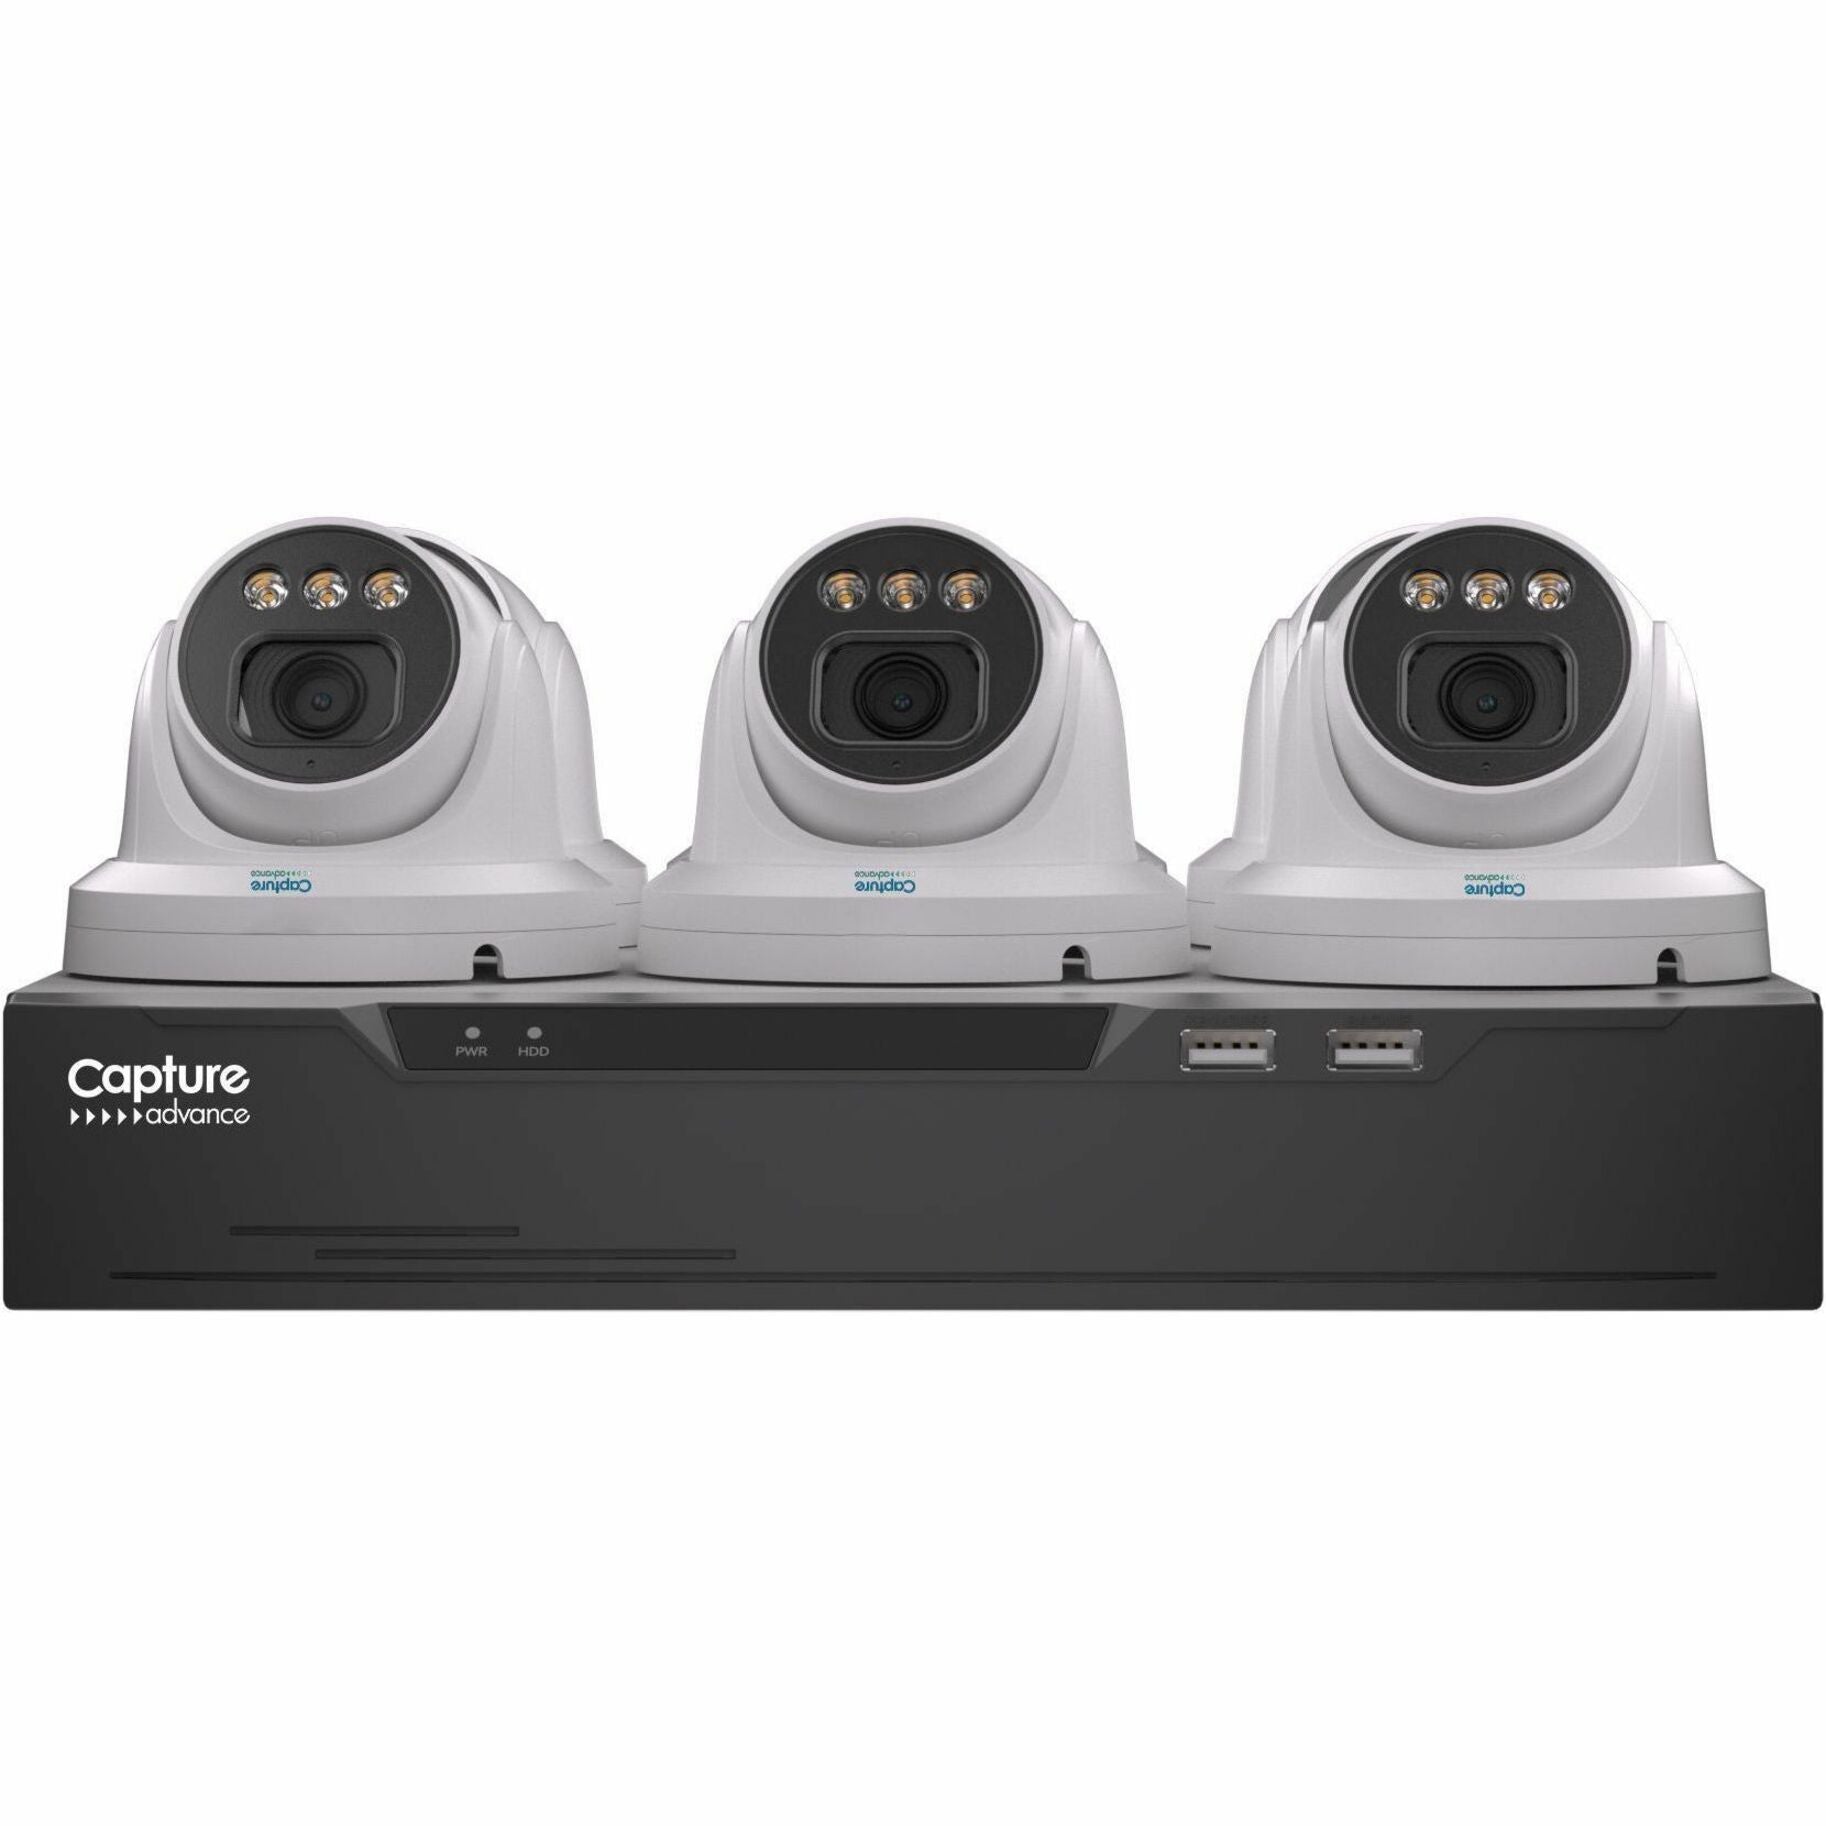 Capture Advance R2-IP8CFCLK 8-CH Full-Color NVR Kit - 2 TB HDD, 4MP Cameras, Android Compatible